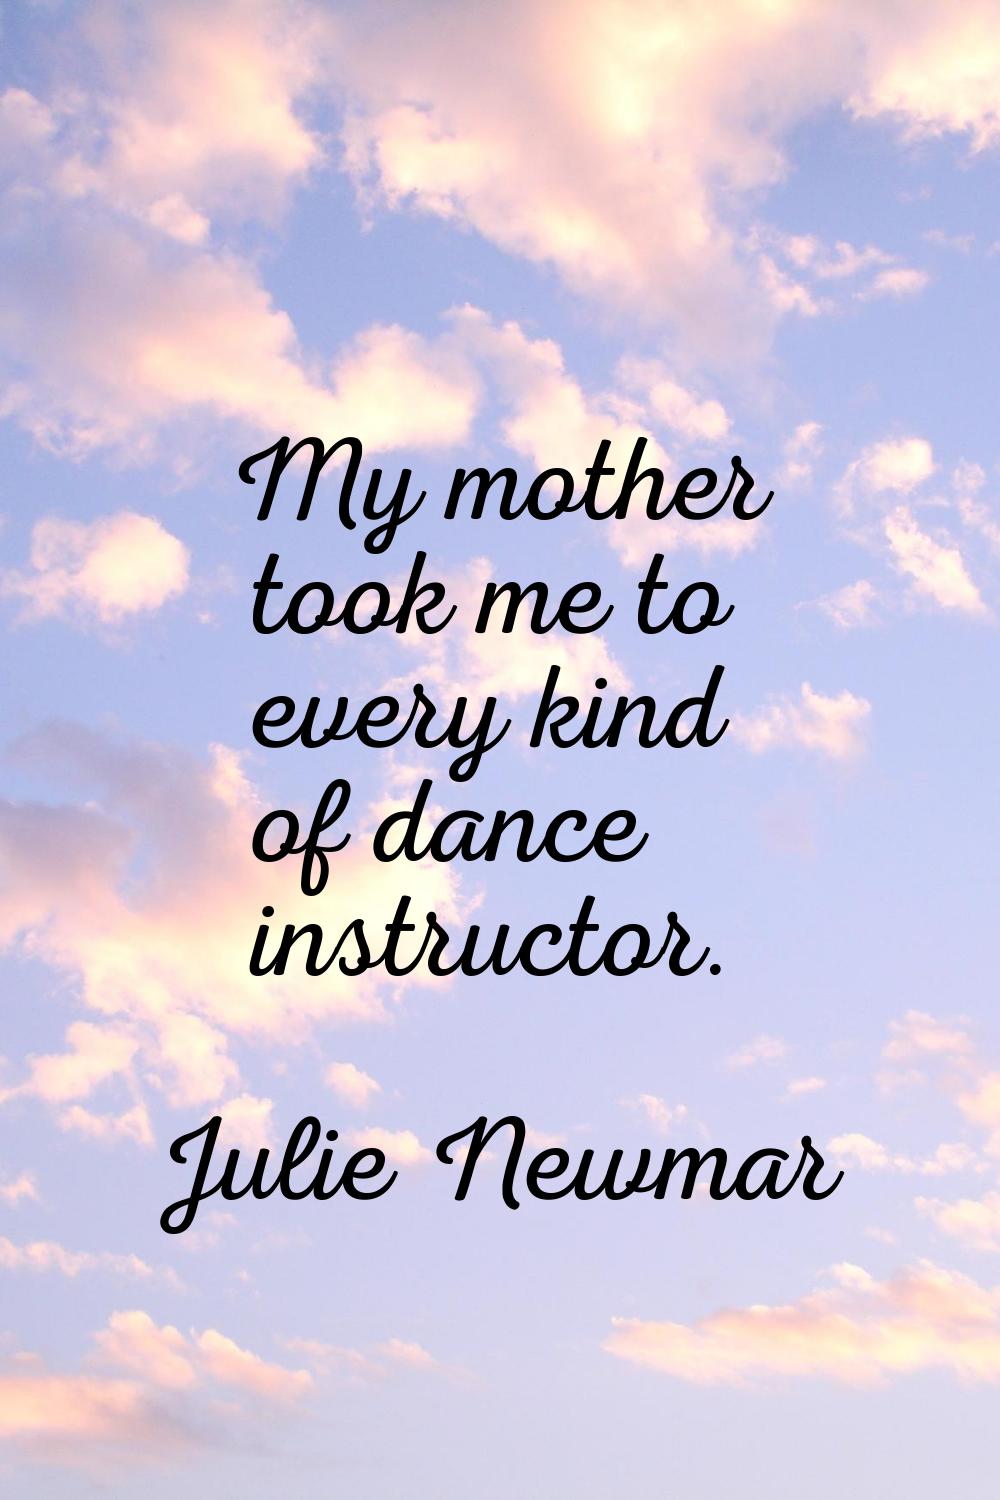 My mother took me to every kind of dance instructor.